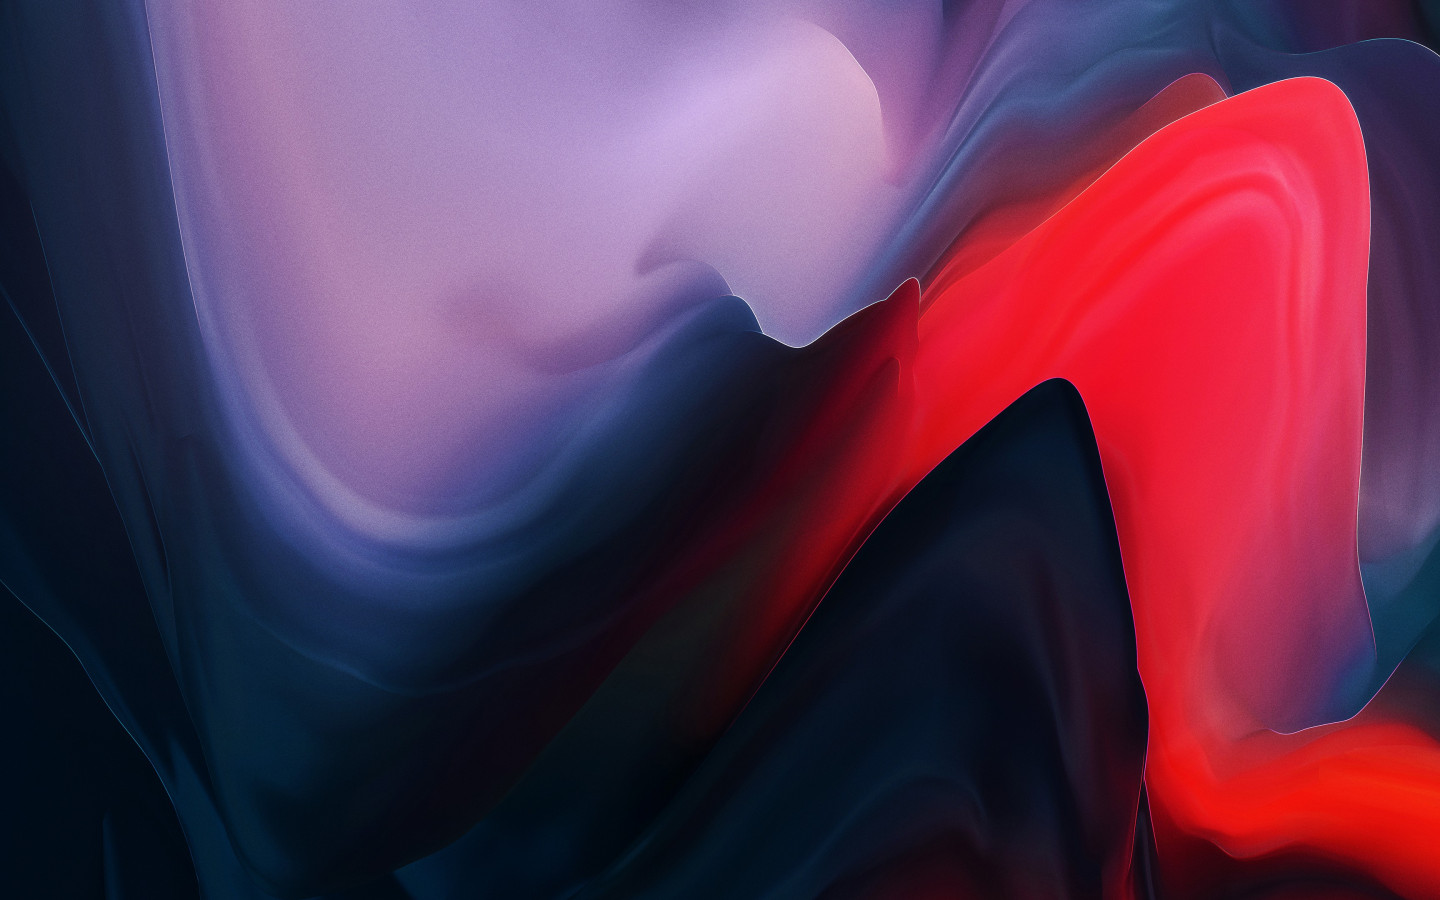 Download wallpaper: The Abstract from OnePlus 6T 1440x900